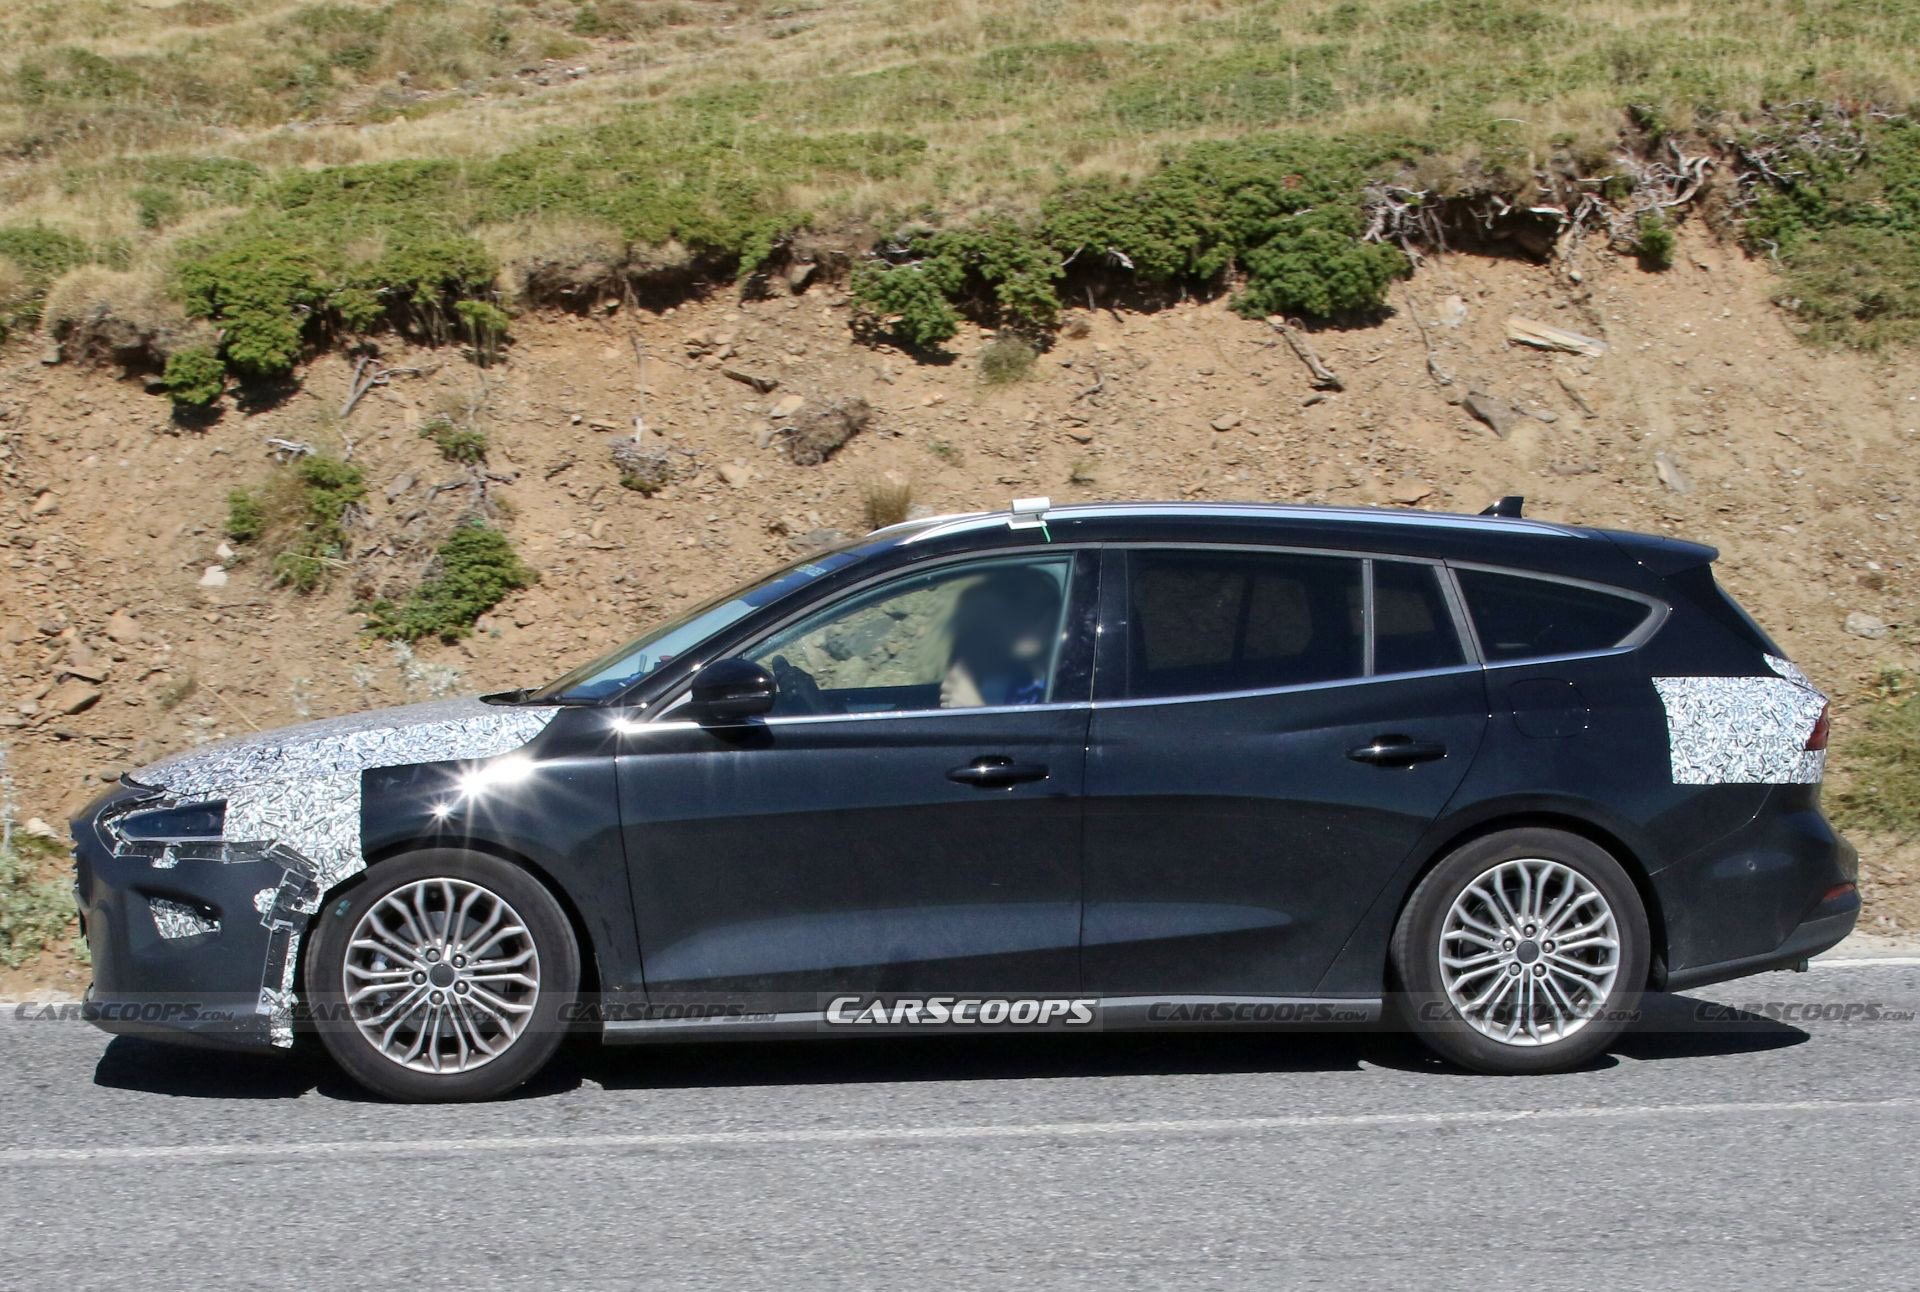 voordelig Jeugd Paar 2022 Ford Focus Wagon Facelift Spied Showing Redesigned Light Units |  Carscoops